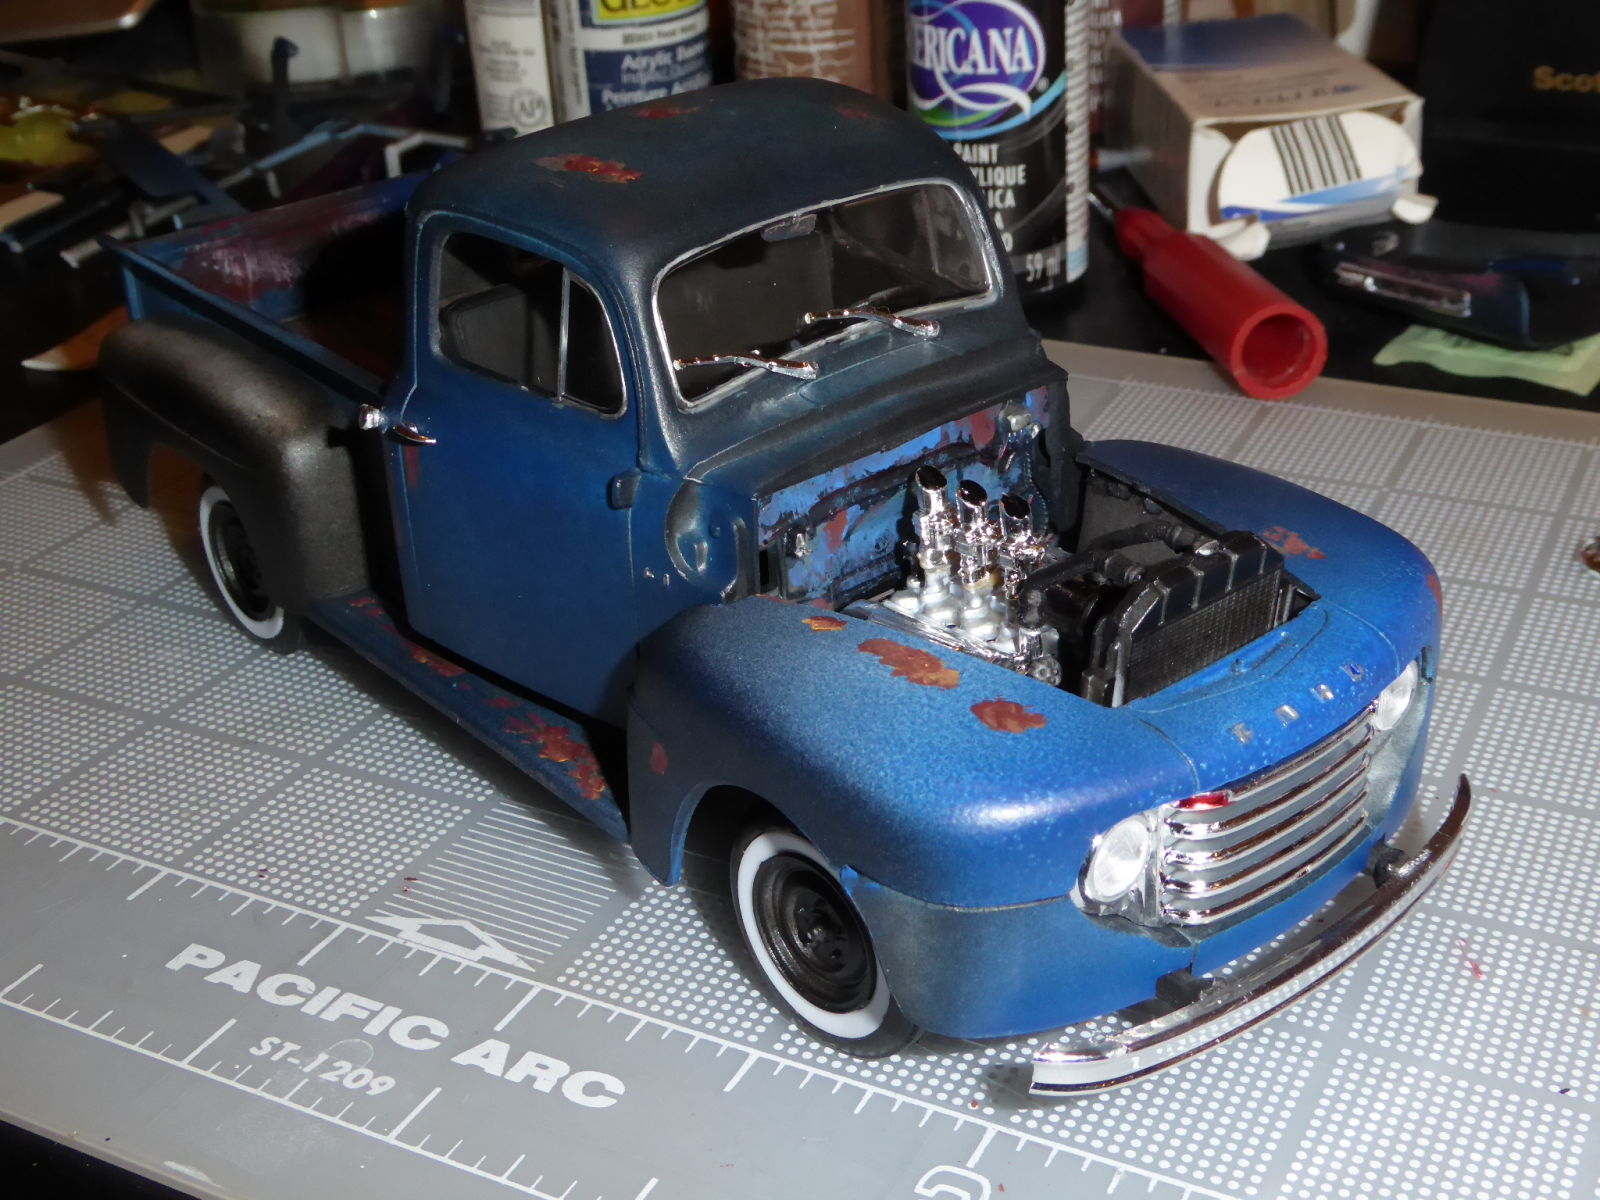 Illustration for article titled Project Restoration: Murica Monday - 50 Ford pickup